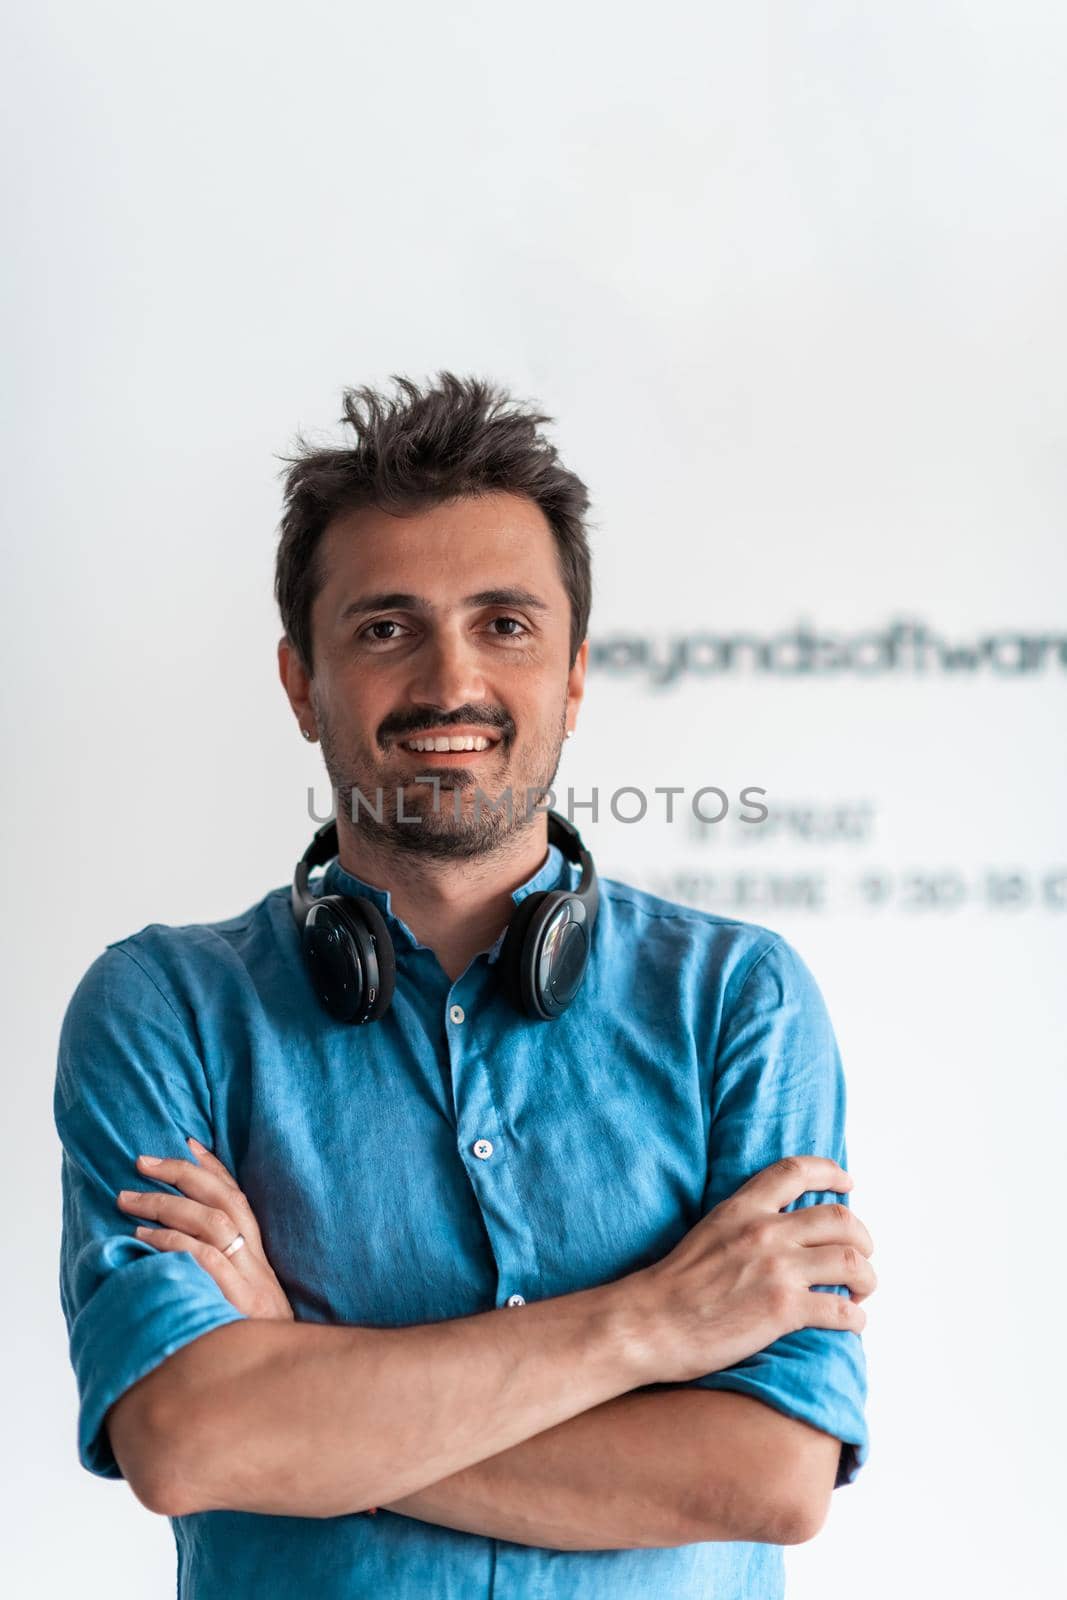 Formal business male portrait. A confident successful casual businessman or manager stands in front of a white background, arms crossed, looking directly at the camera and smiling friendly. High quality photography by dotshock